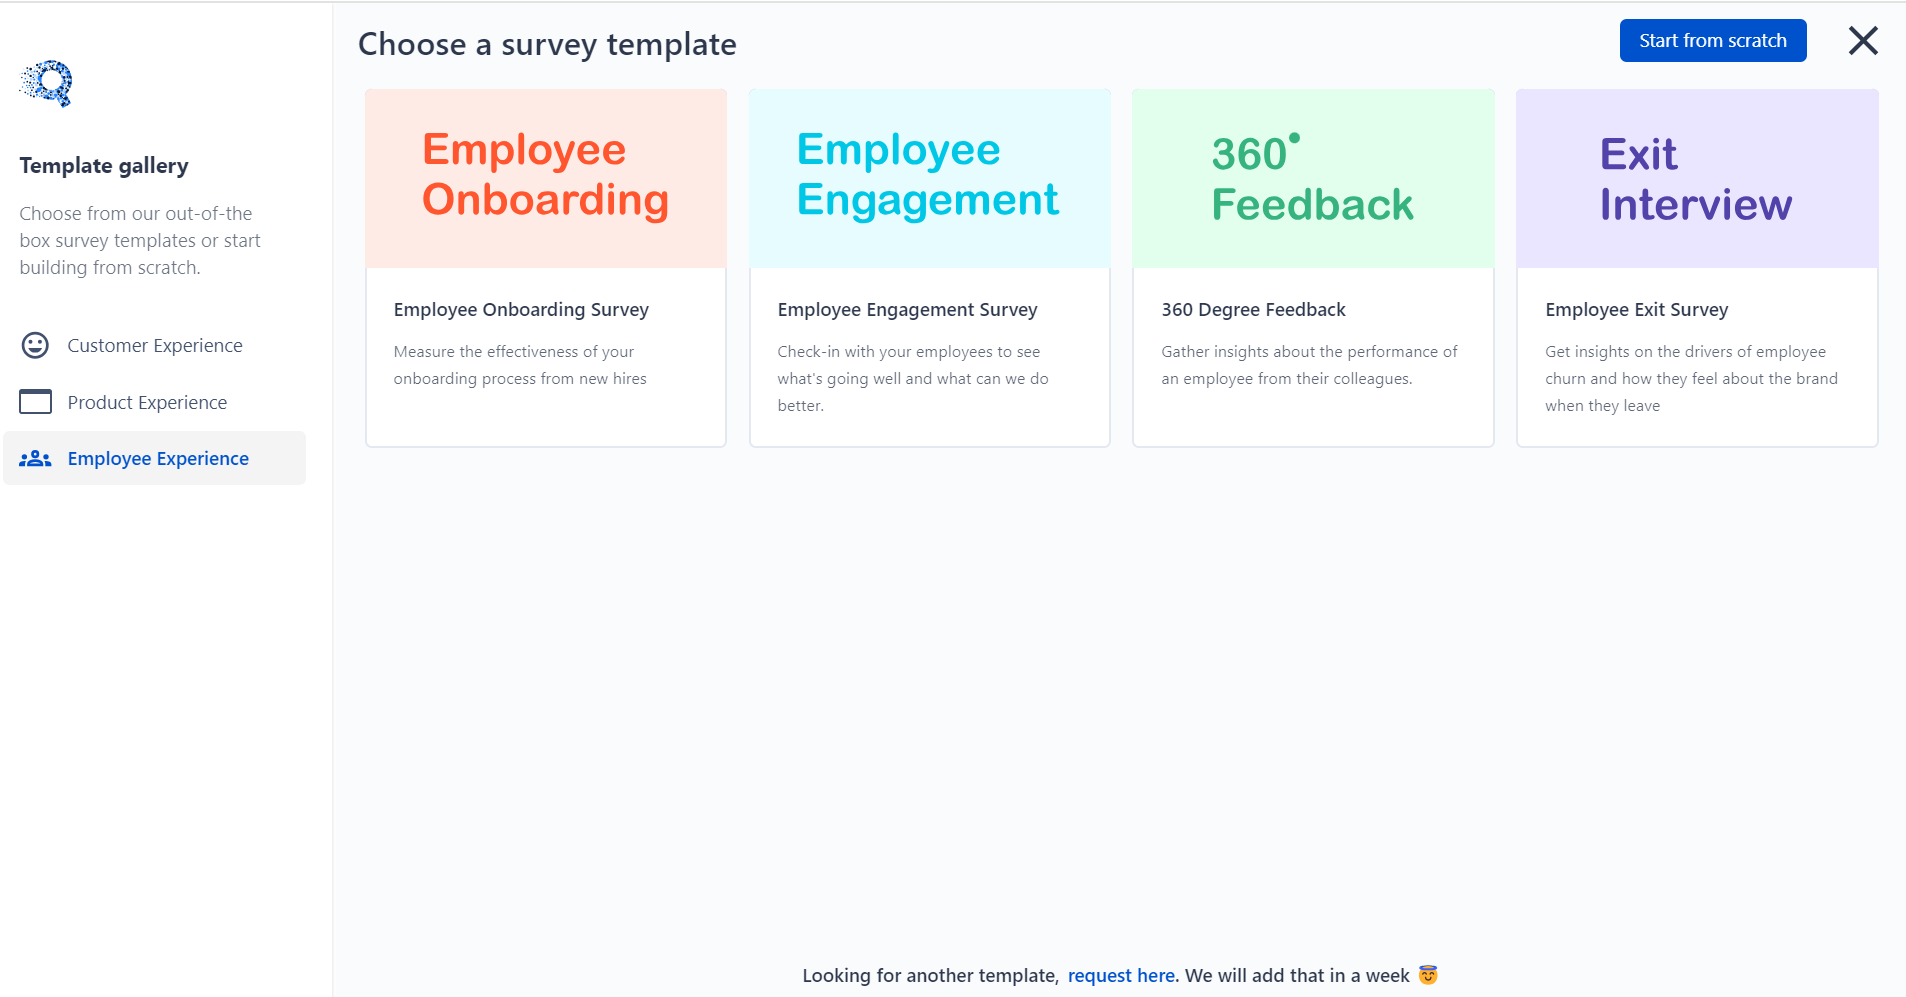 This is the image of Employee experience survey templates with different templates - employee onboarding. Employee engagement, 360 feedback, and exit feedback. 